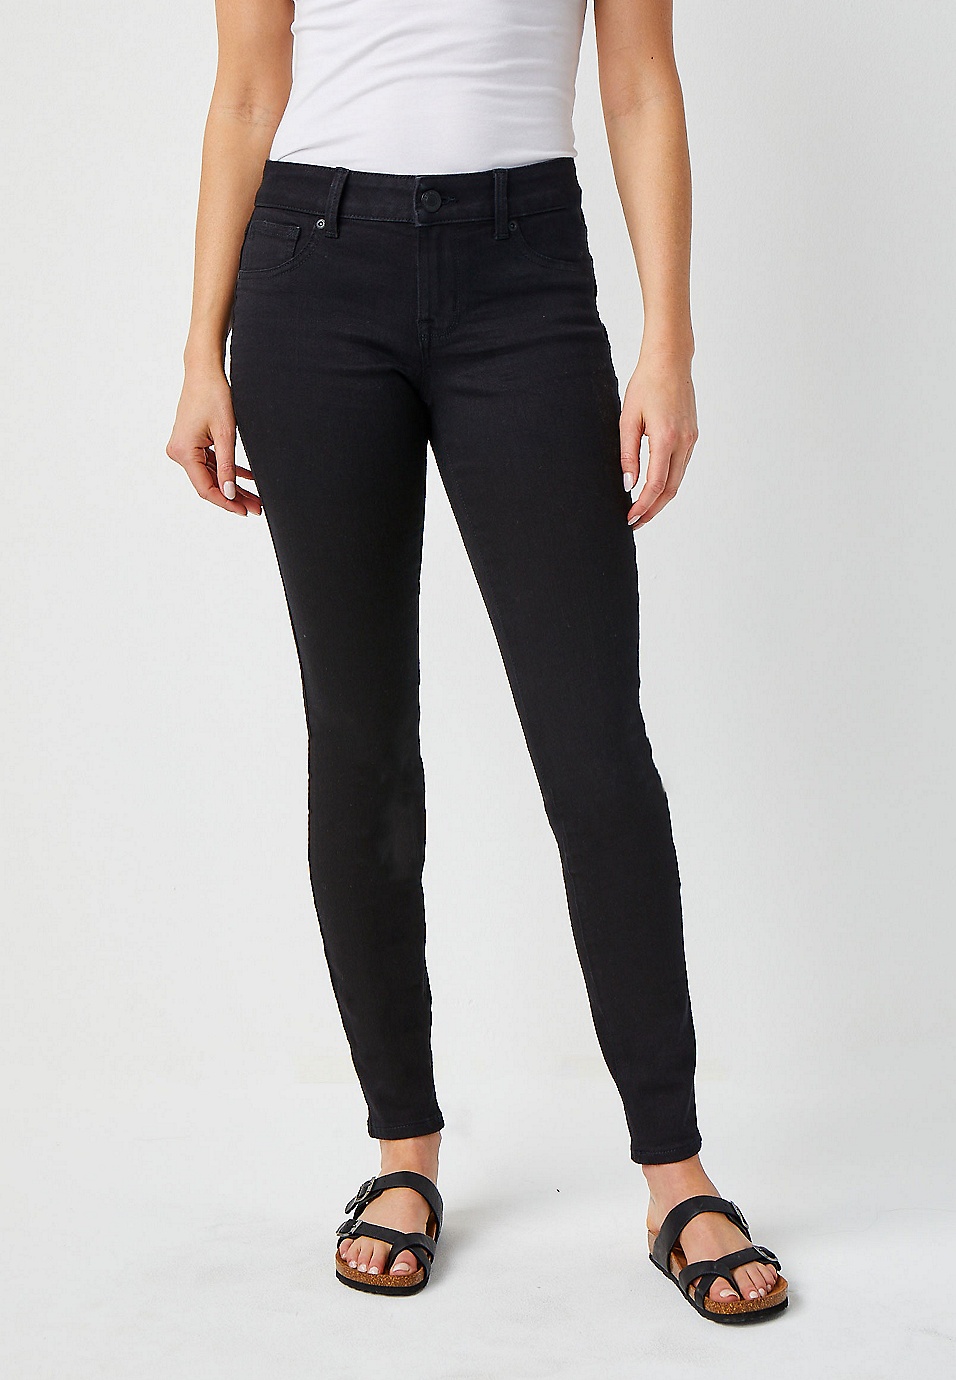 m jeans by maurices™ Black Mid Rise Jegging | maurices